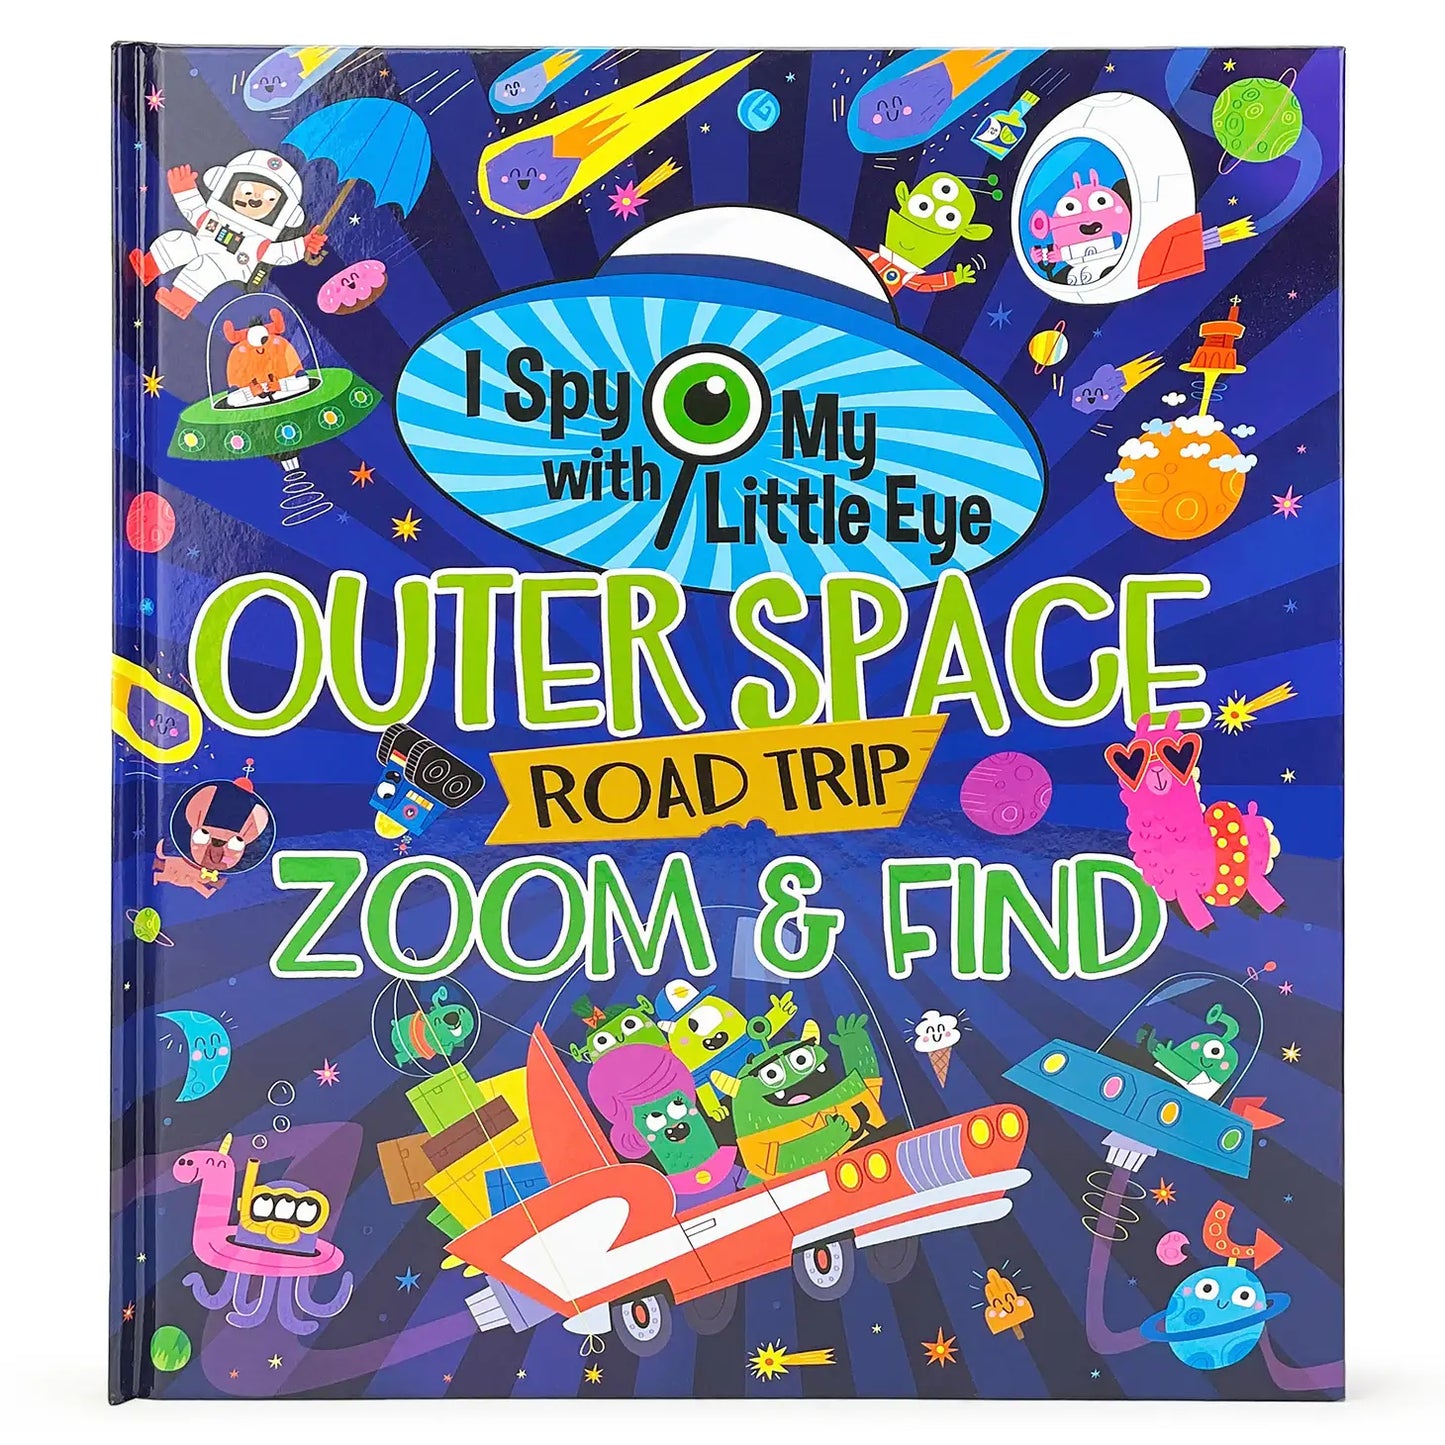 Outer Space Road Trip Zoom & Find (I Spy with My Little Eye)